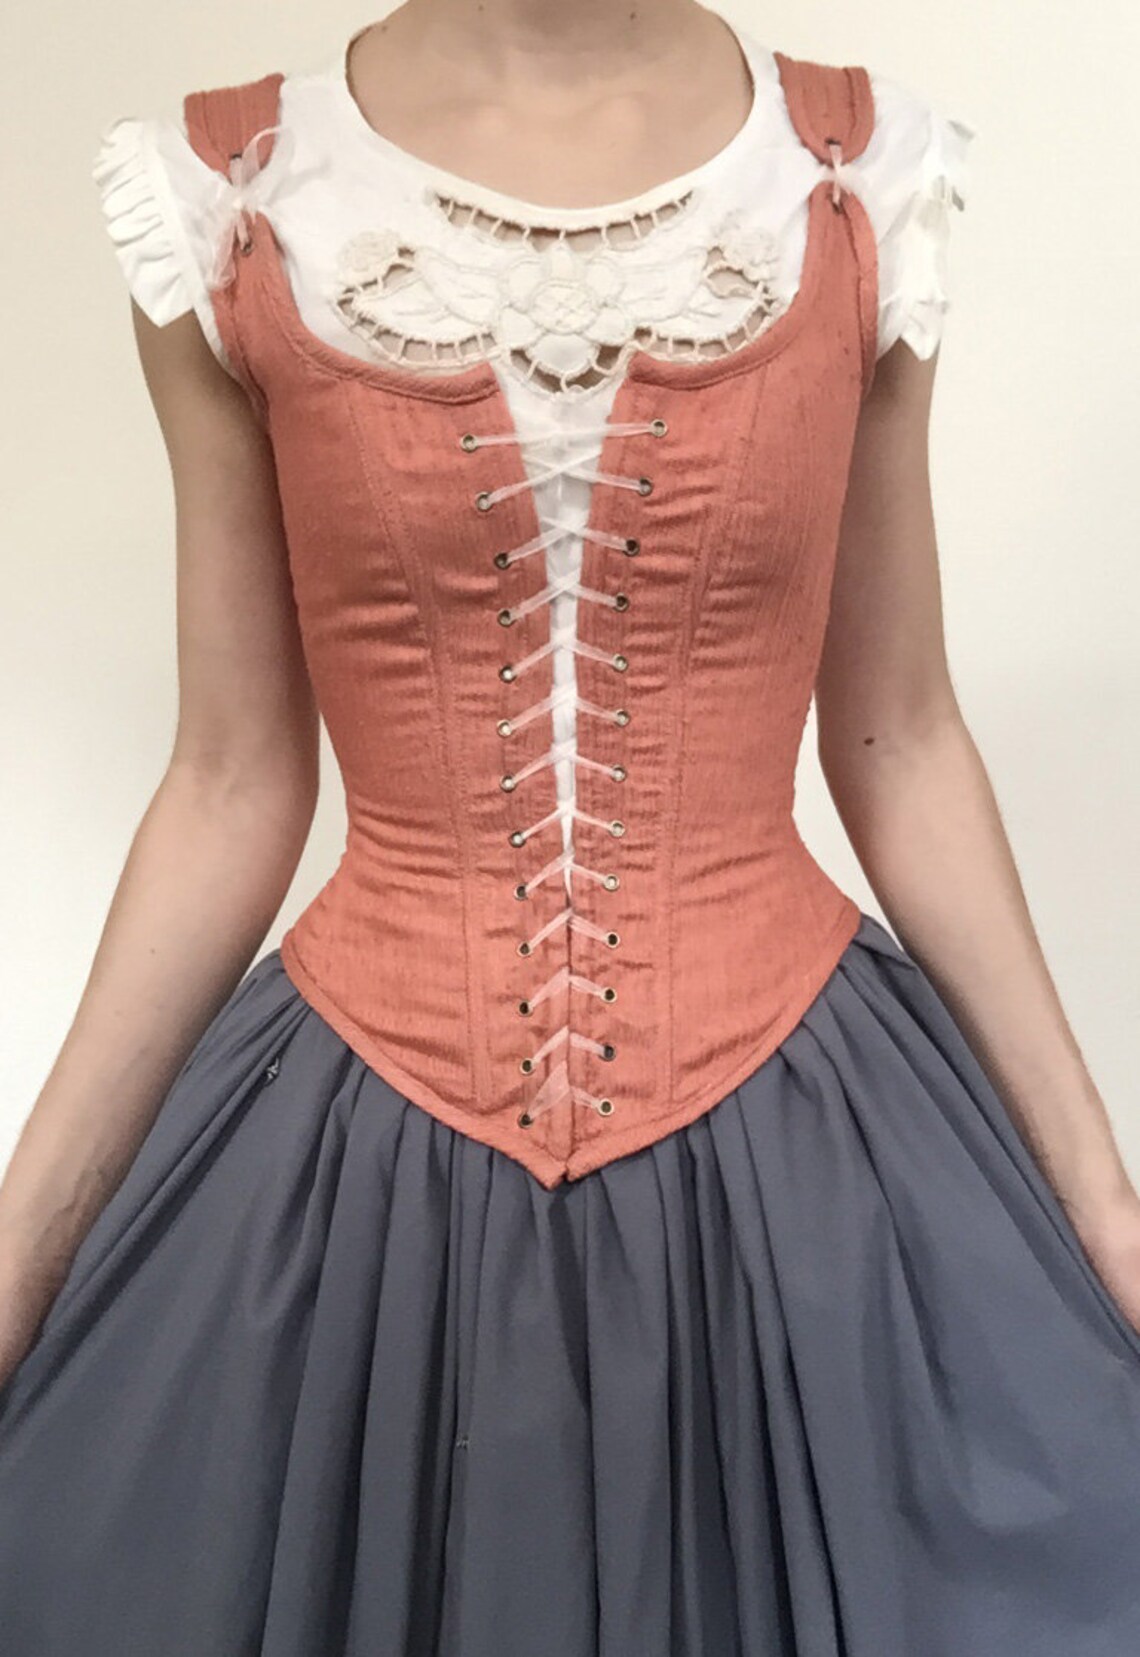 Peasant Bodice Renaissance Corset in Rose/Gold with Adjustable | Etsy